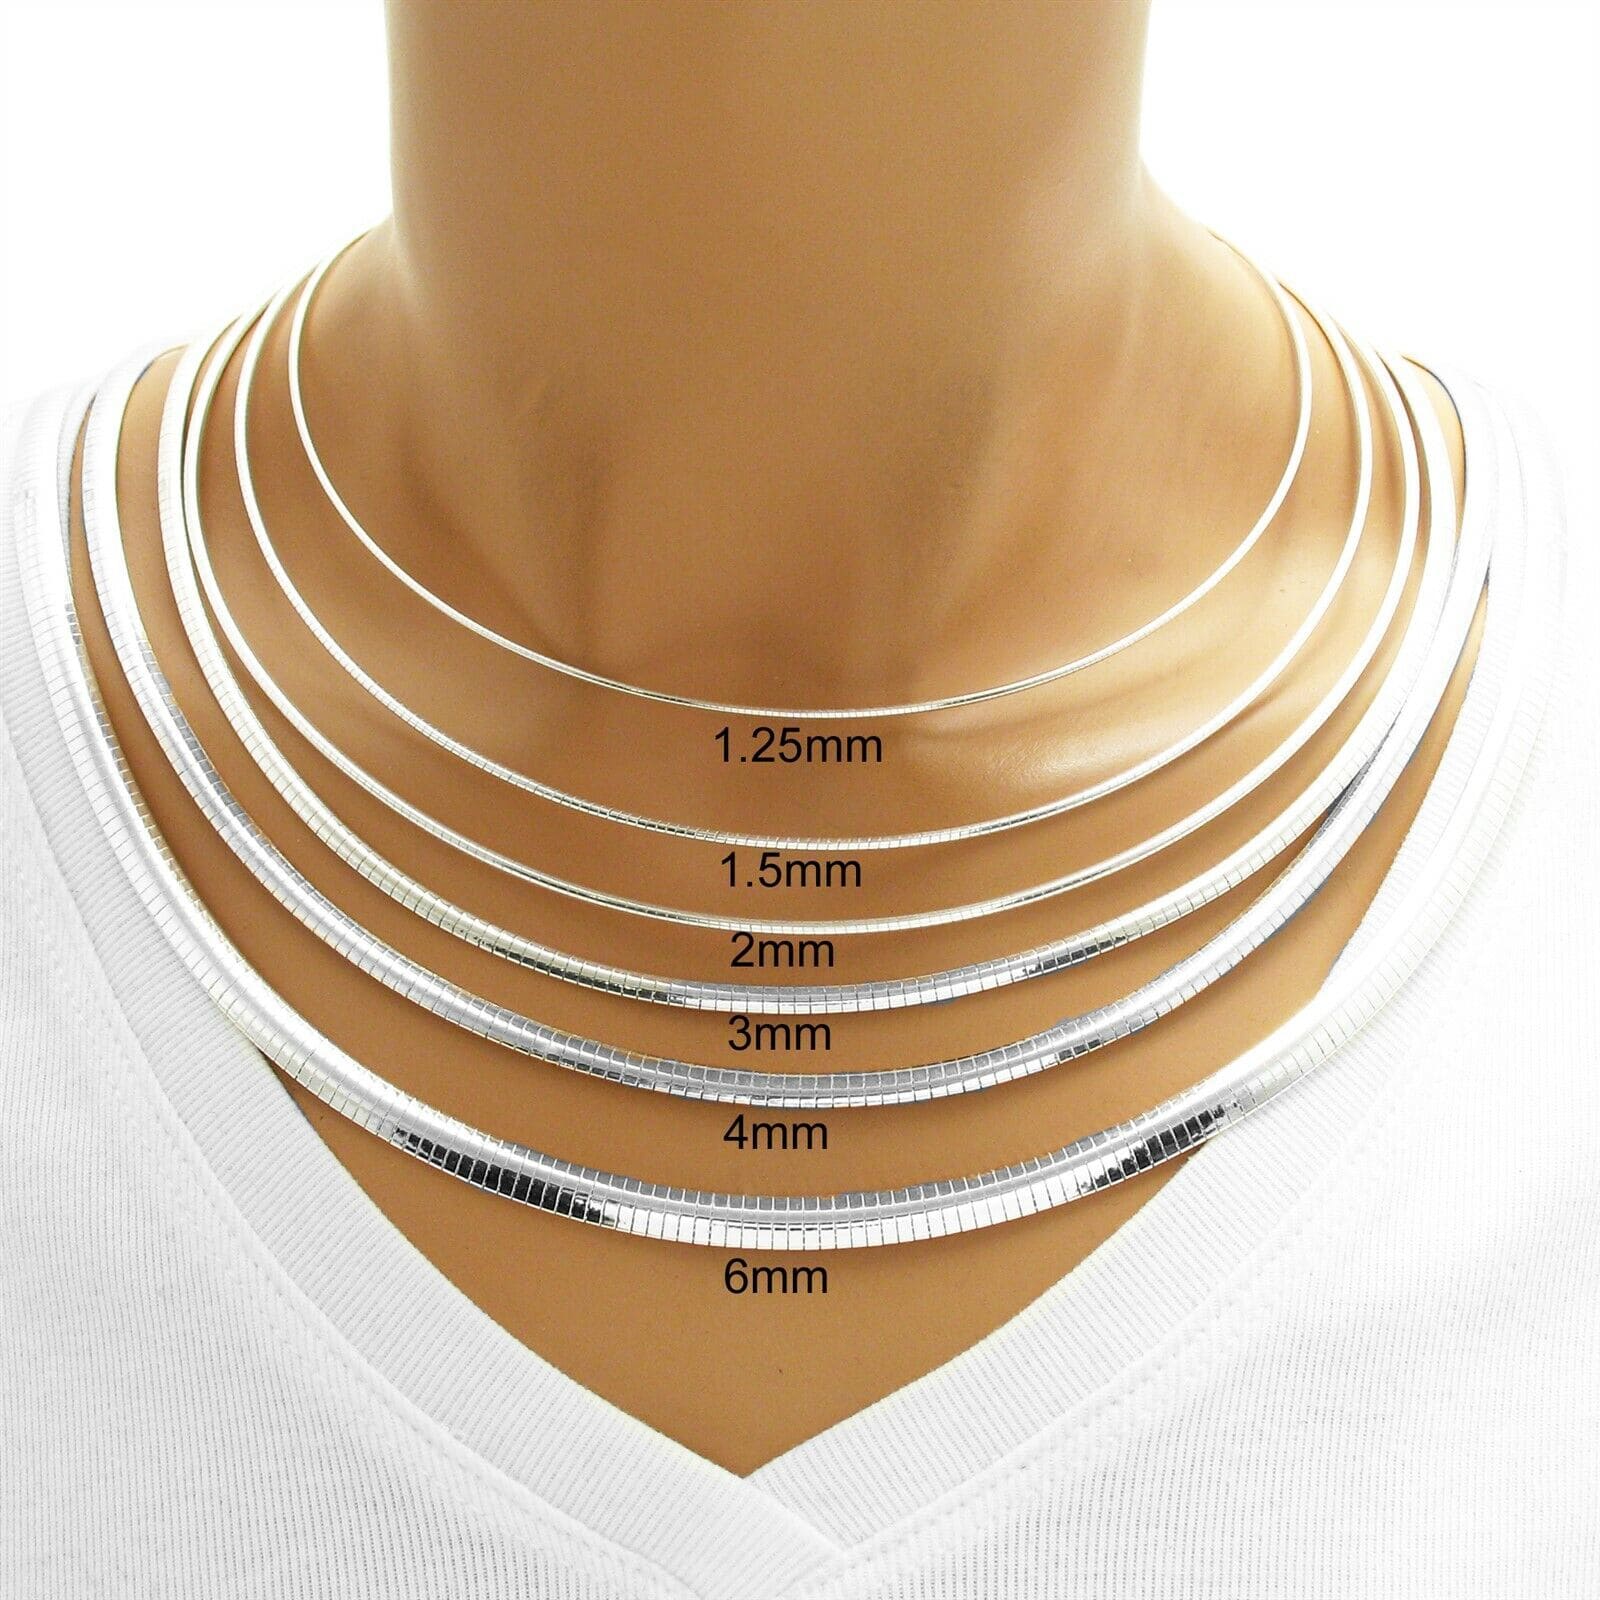 A mannequin's neck is shown with different lengths of necklaces.